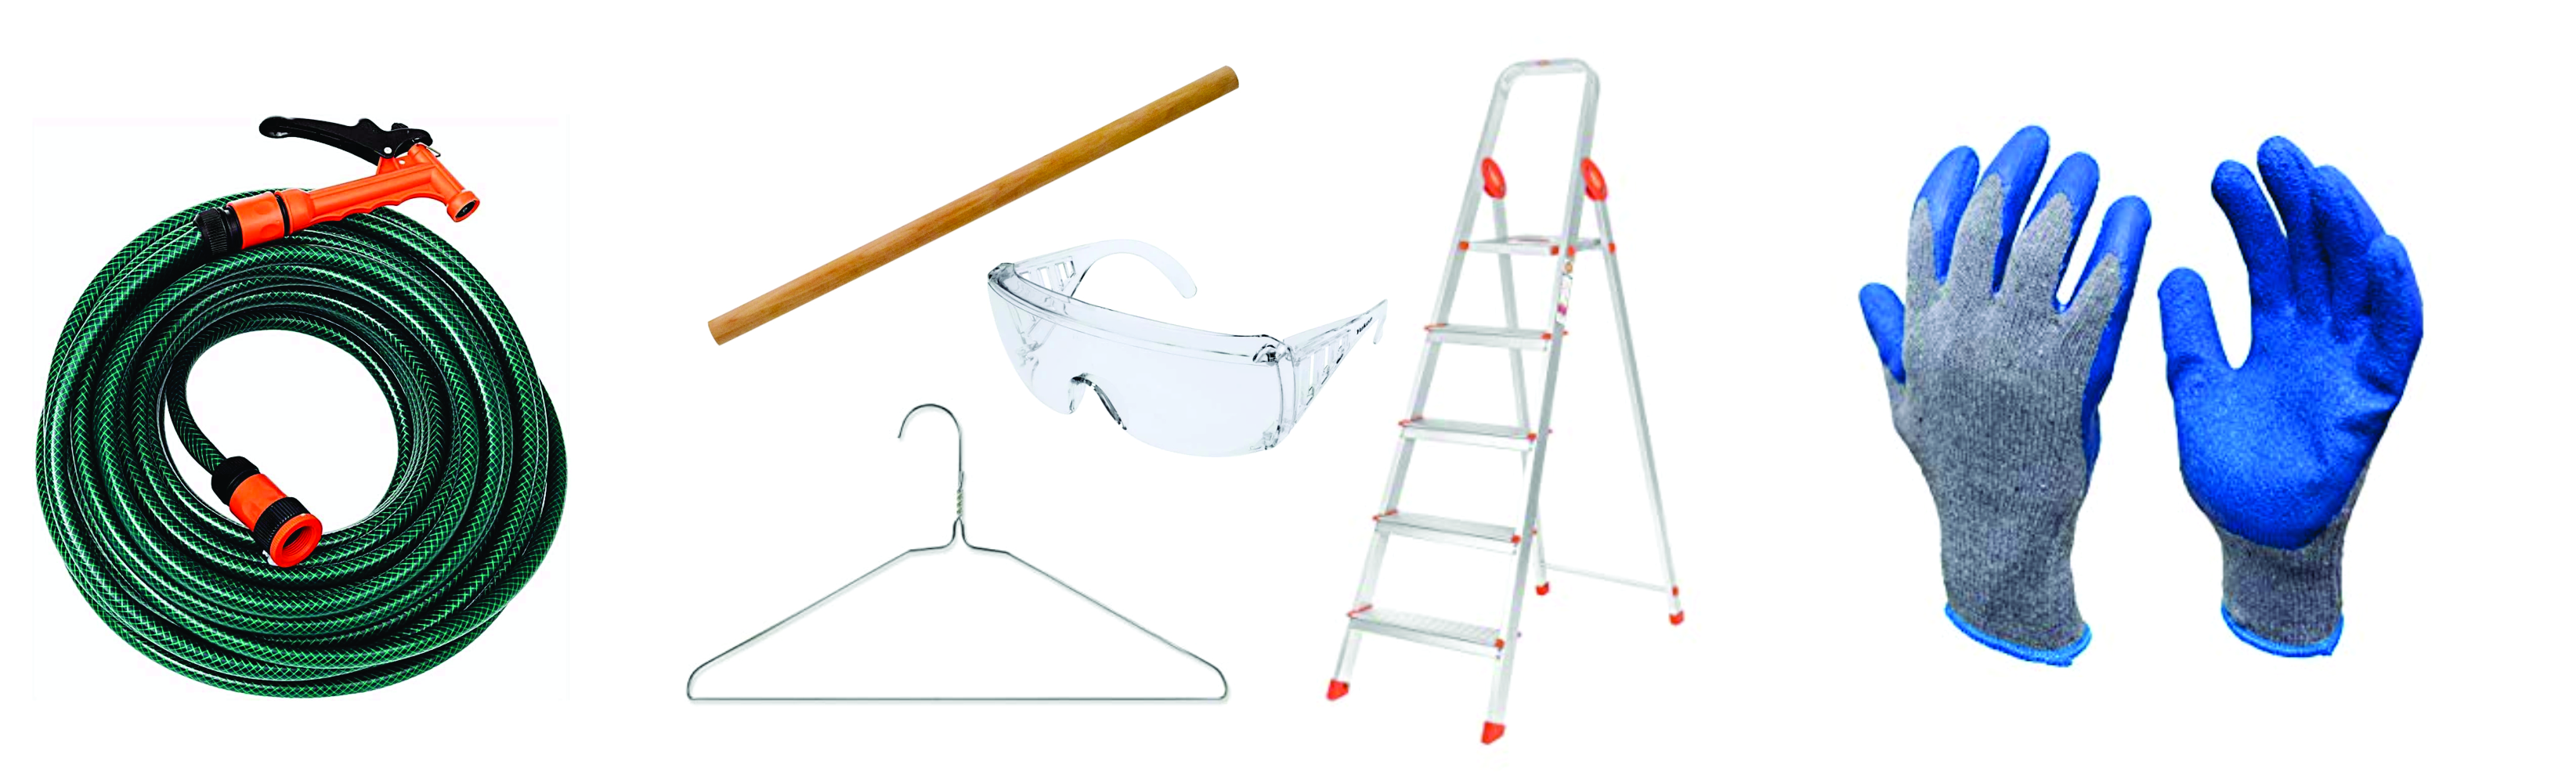 Examples of required equipment